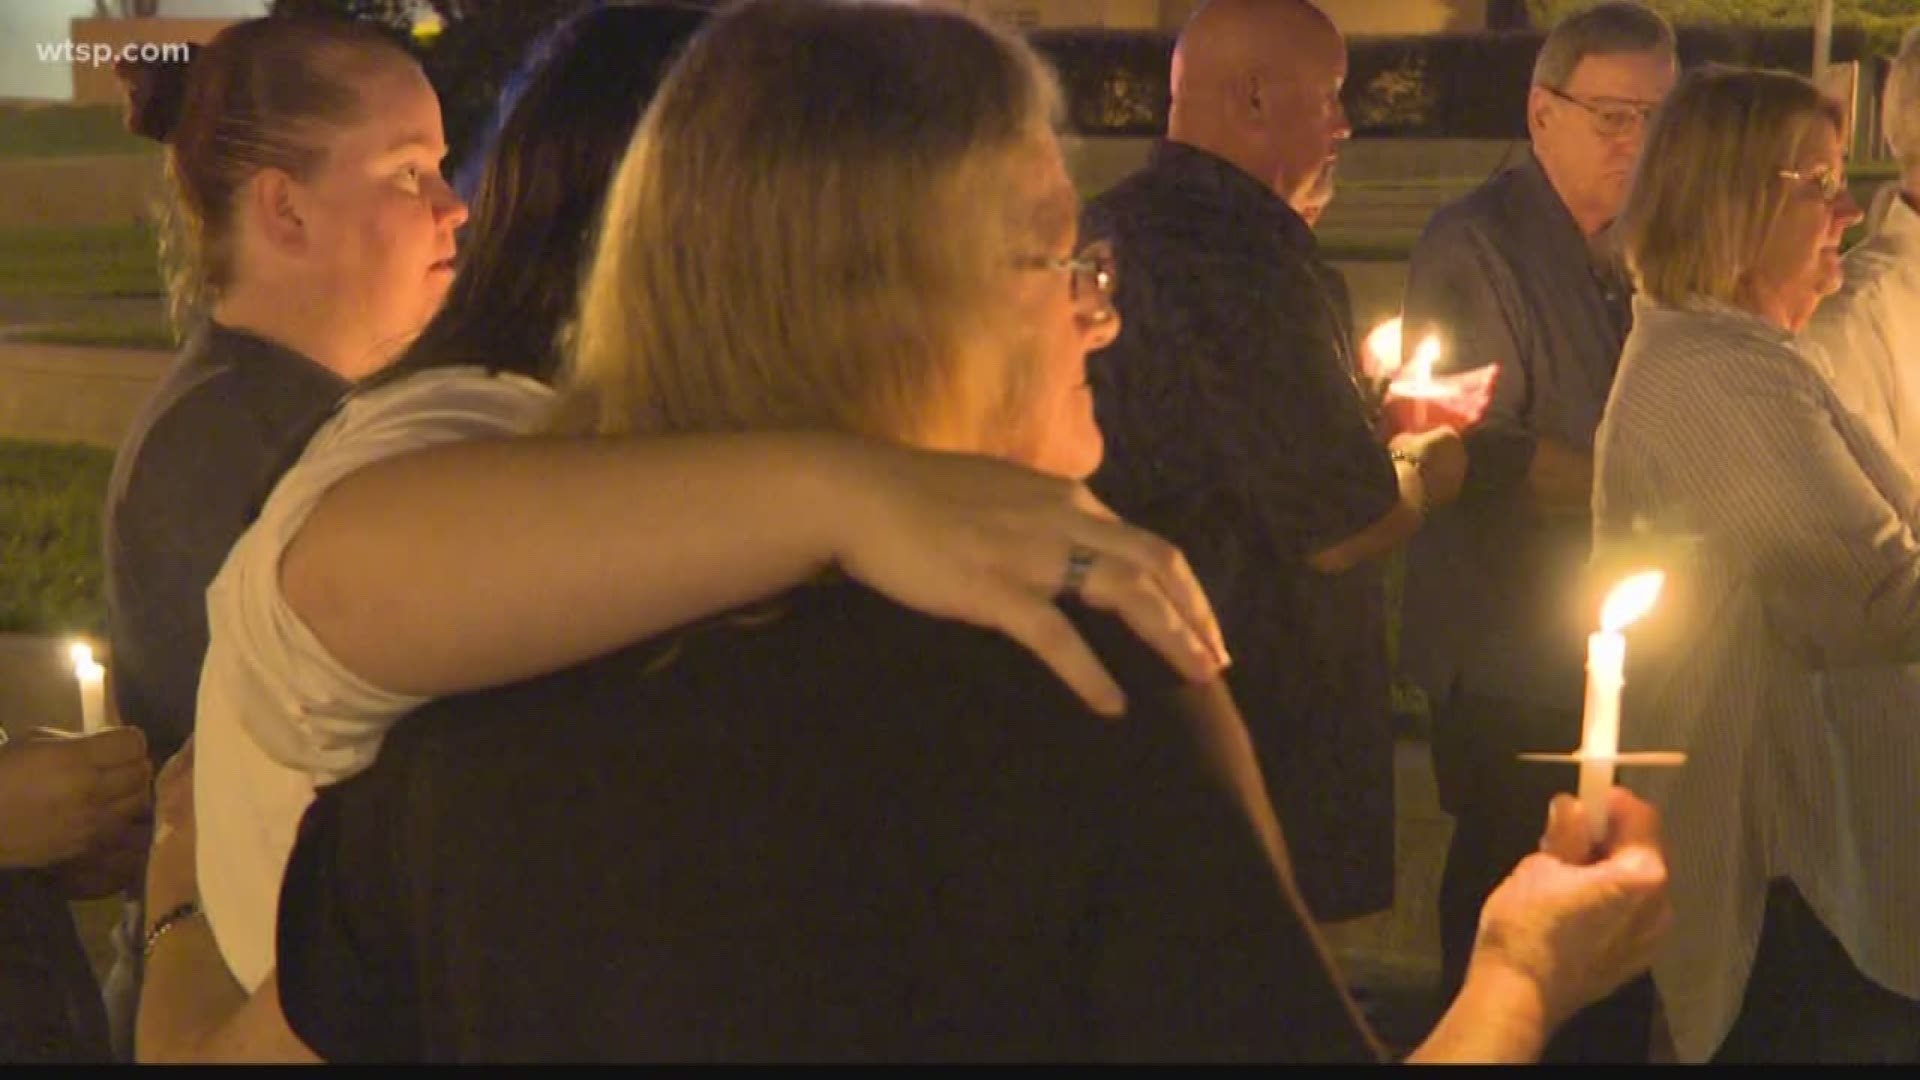 Friends and family gathered to say goodbye to a man killed in a double-murder suicide on Christmas Eve.